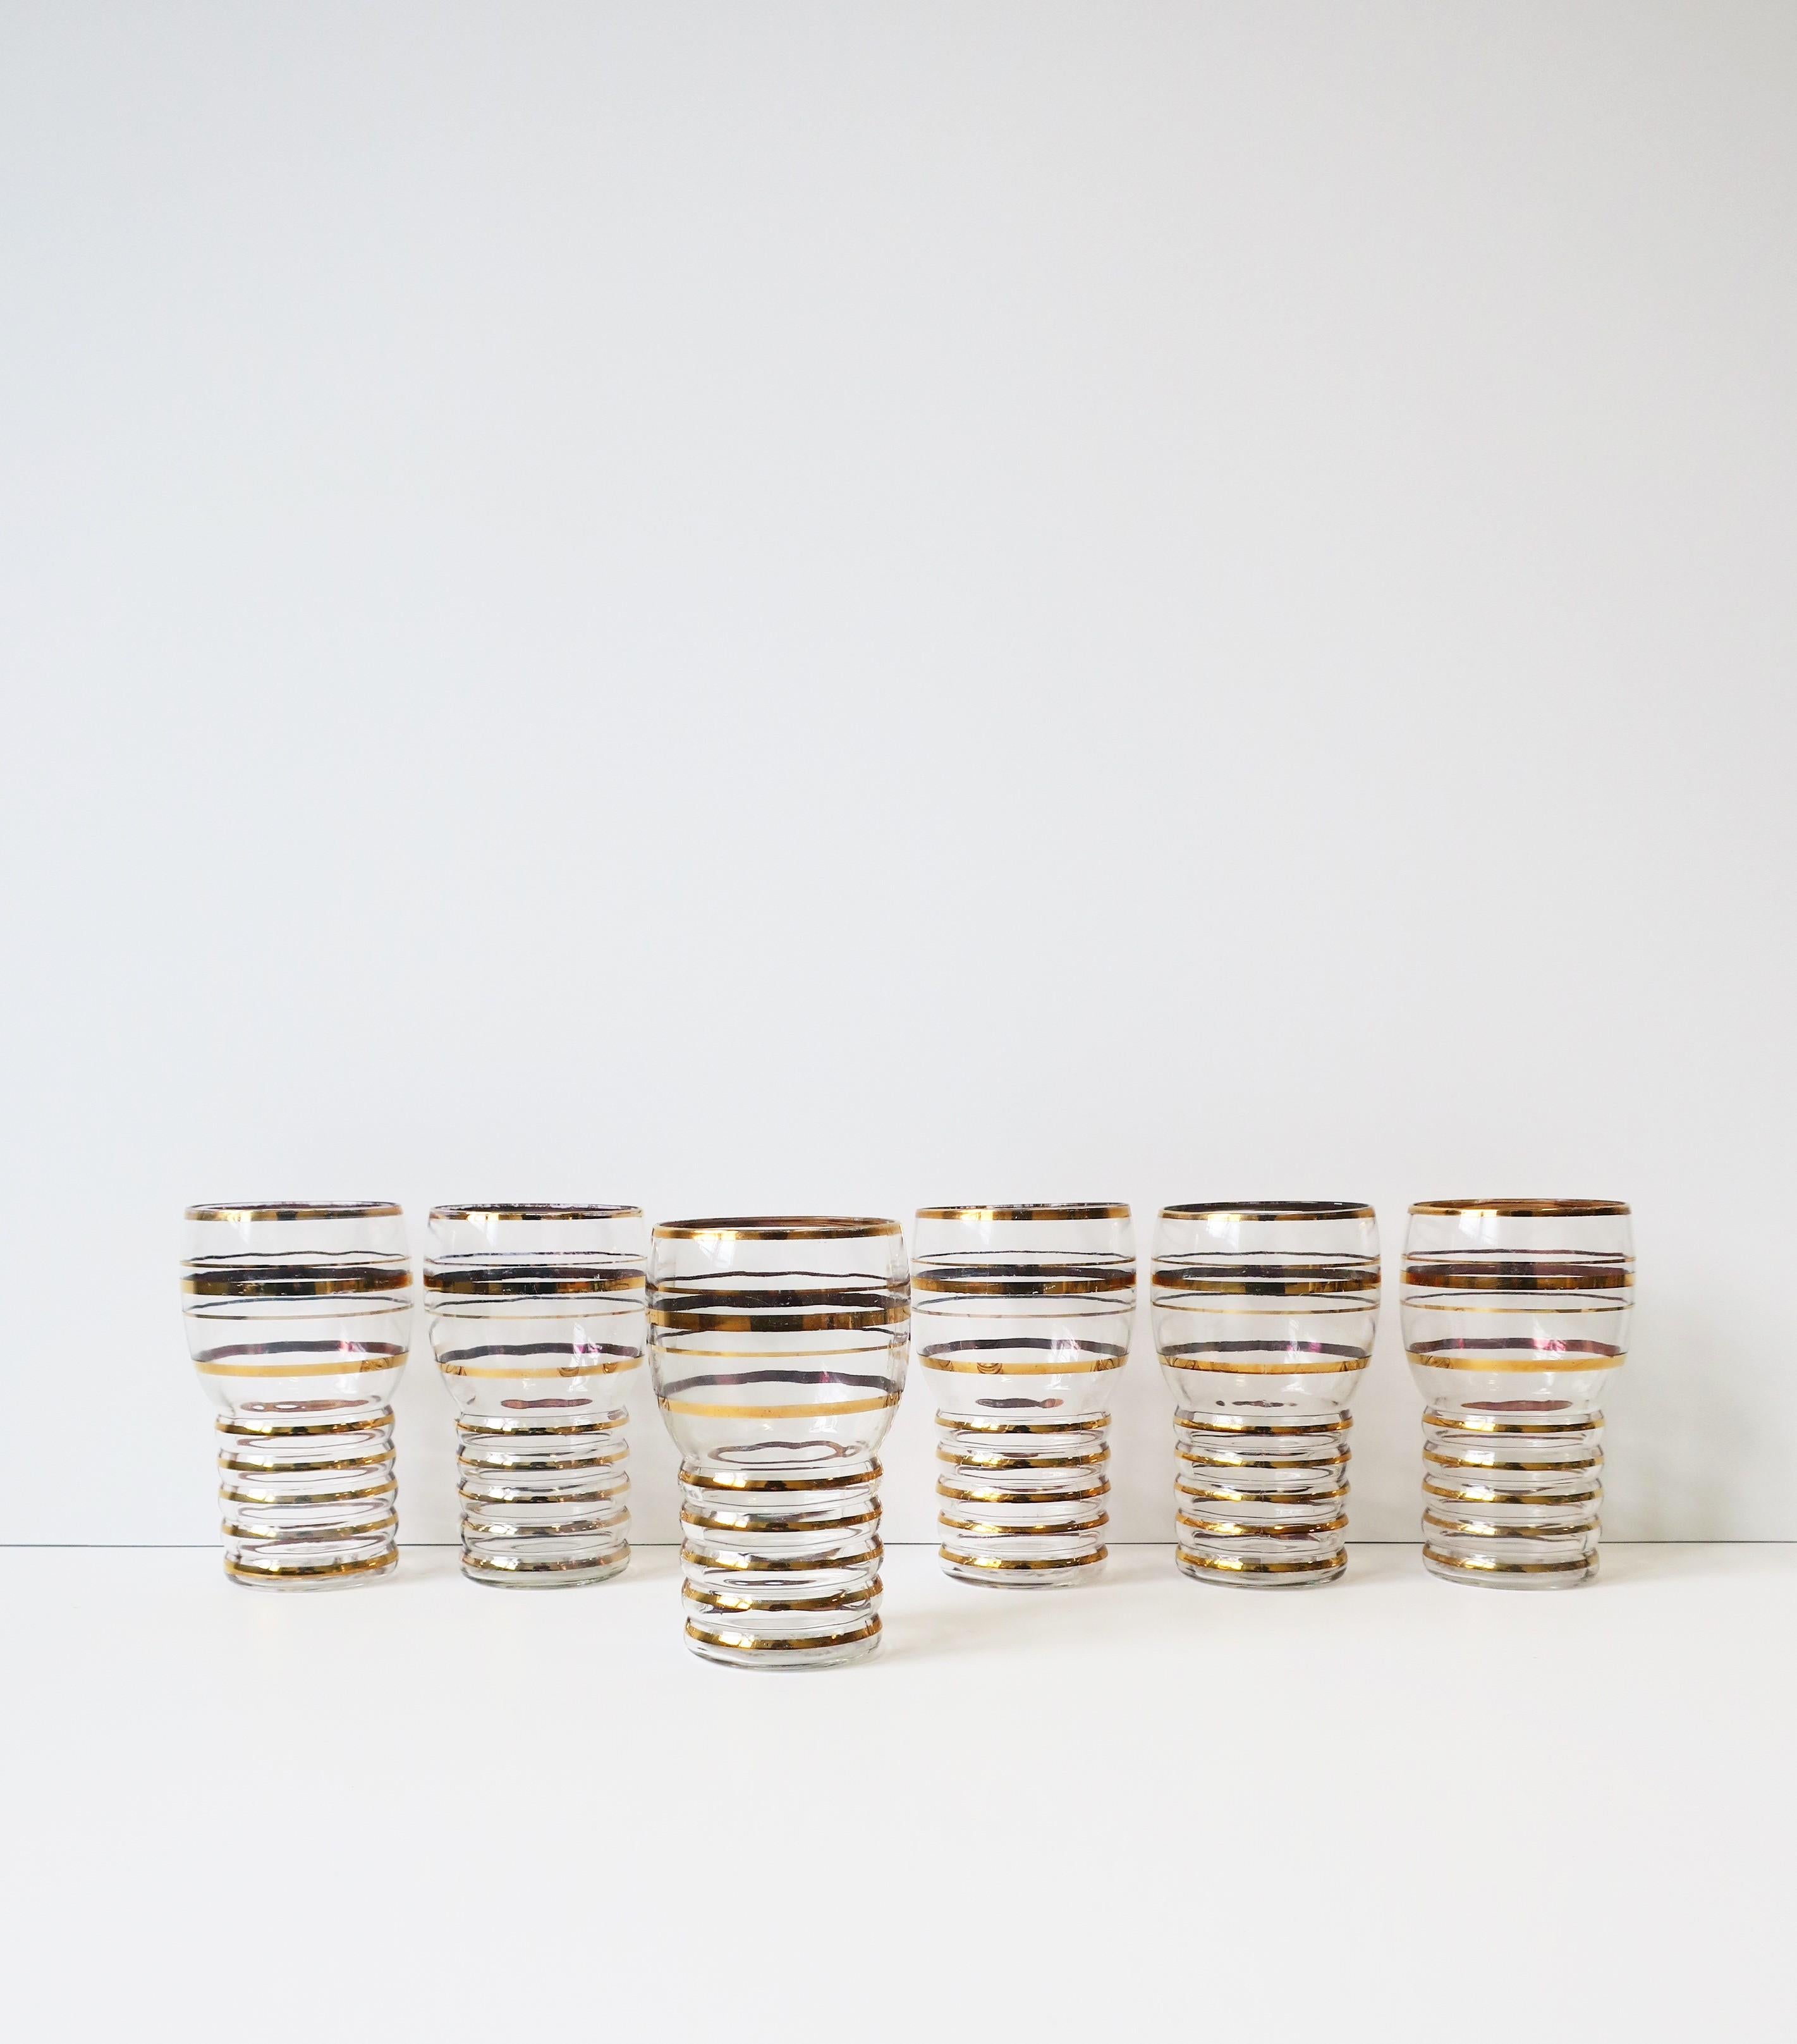 A shapely set of six (6) vintage/antique highball cocktail glasses with gold band design, circa early to mid-20th century. A great set for holiday or summer entertaining, and for any bar, bar cart, china cabinet, etc. Dimensions: 2.88